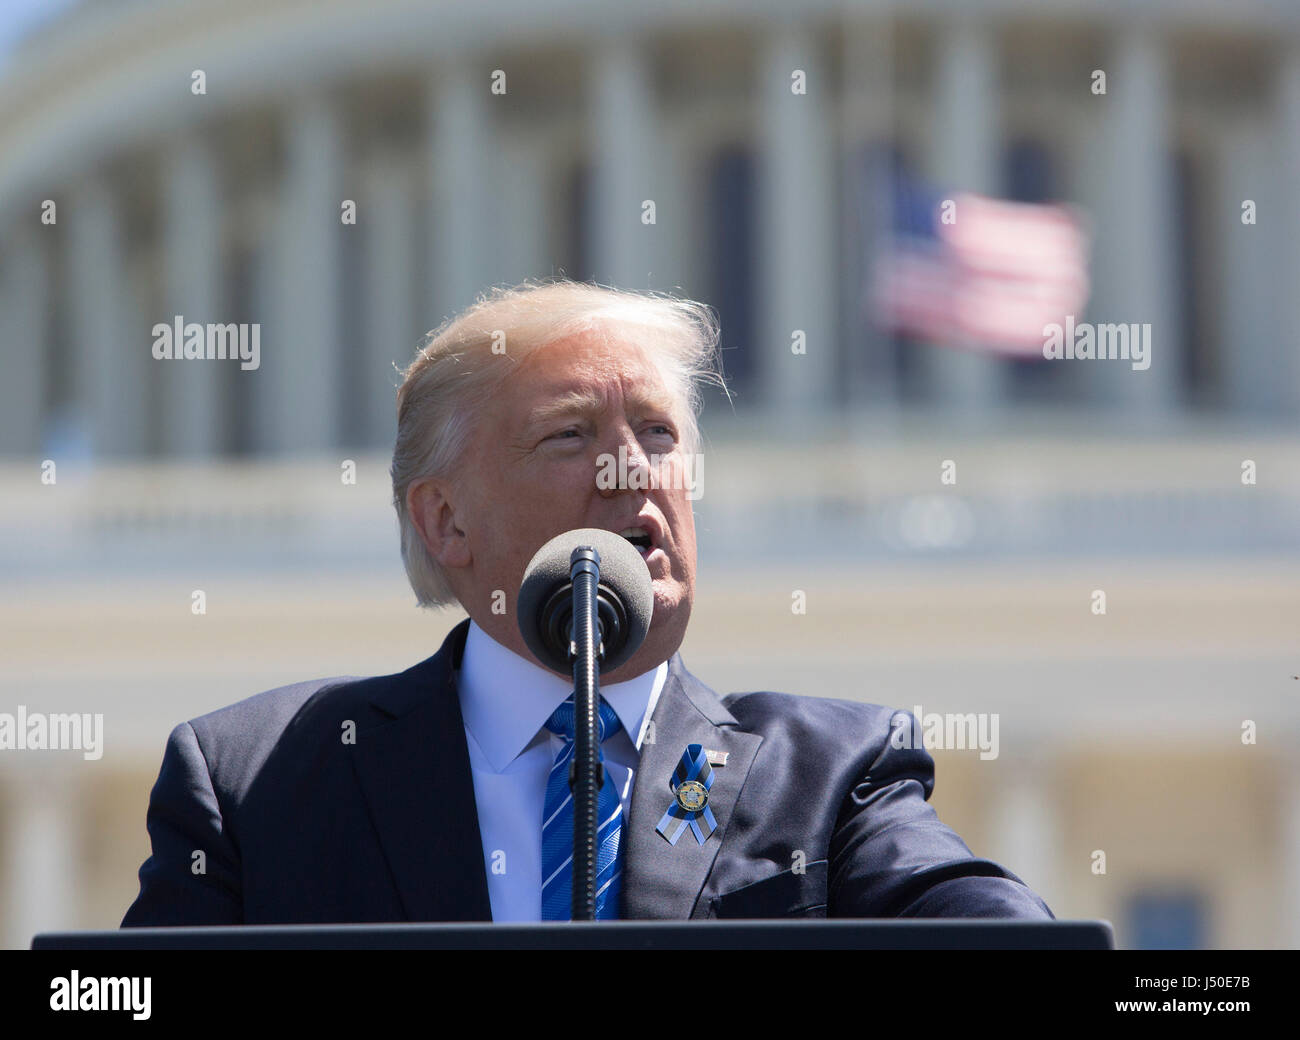 United States President Donald J. Trump makes remarks at the 36th Annual National Peace Officers Memorial Service at the US Capitol in Washington, DC, May 15, 2017. Credit: Chris Kleponis/Pool via CNP /MediaPunch Stock Photo